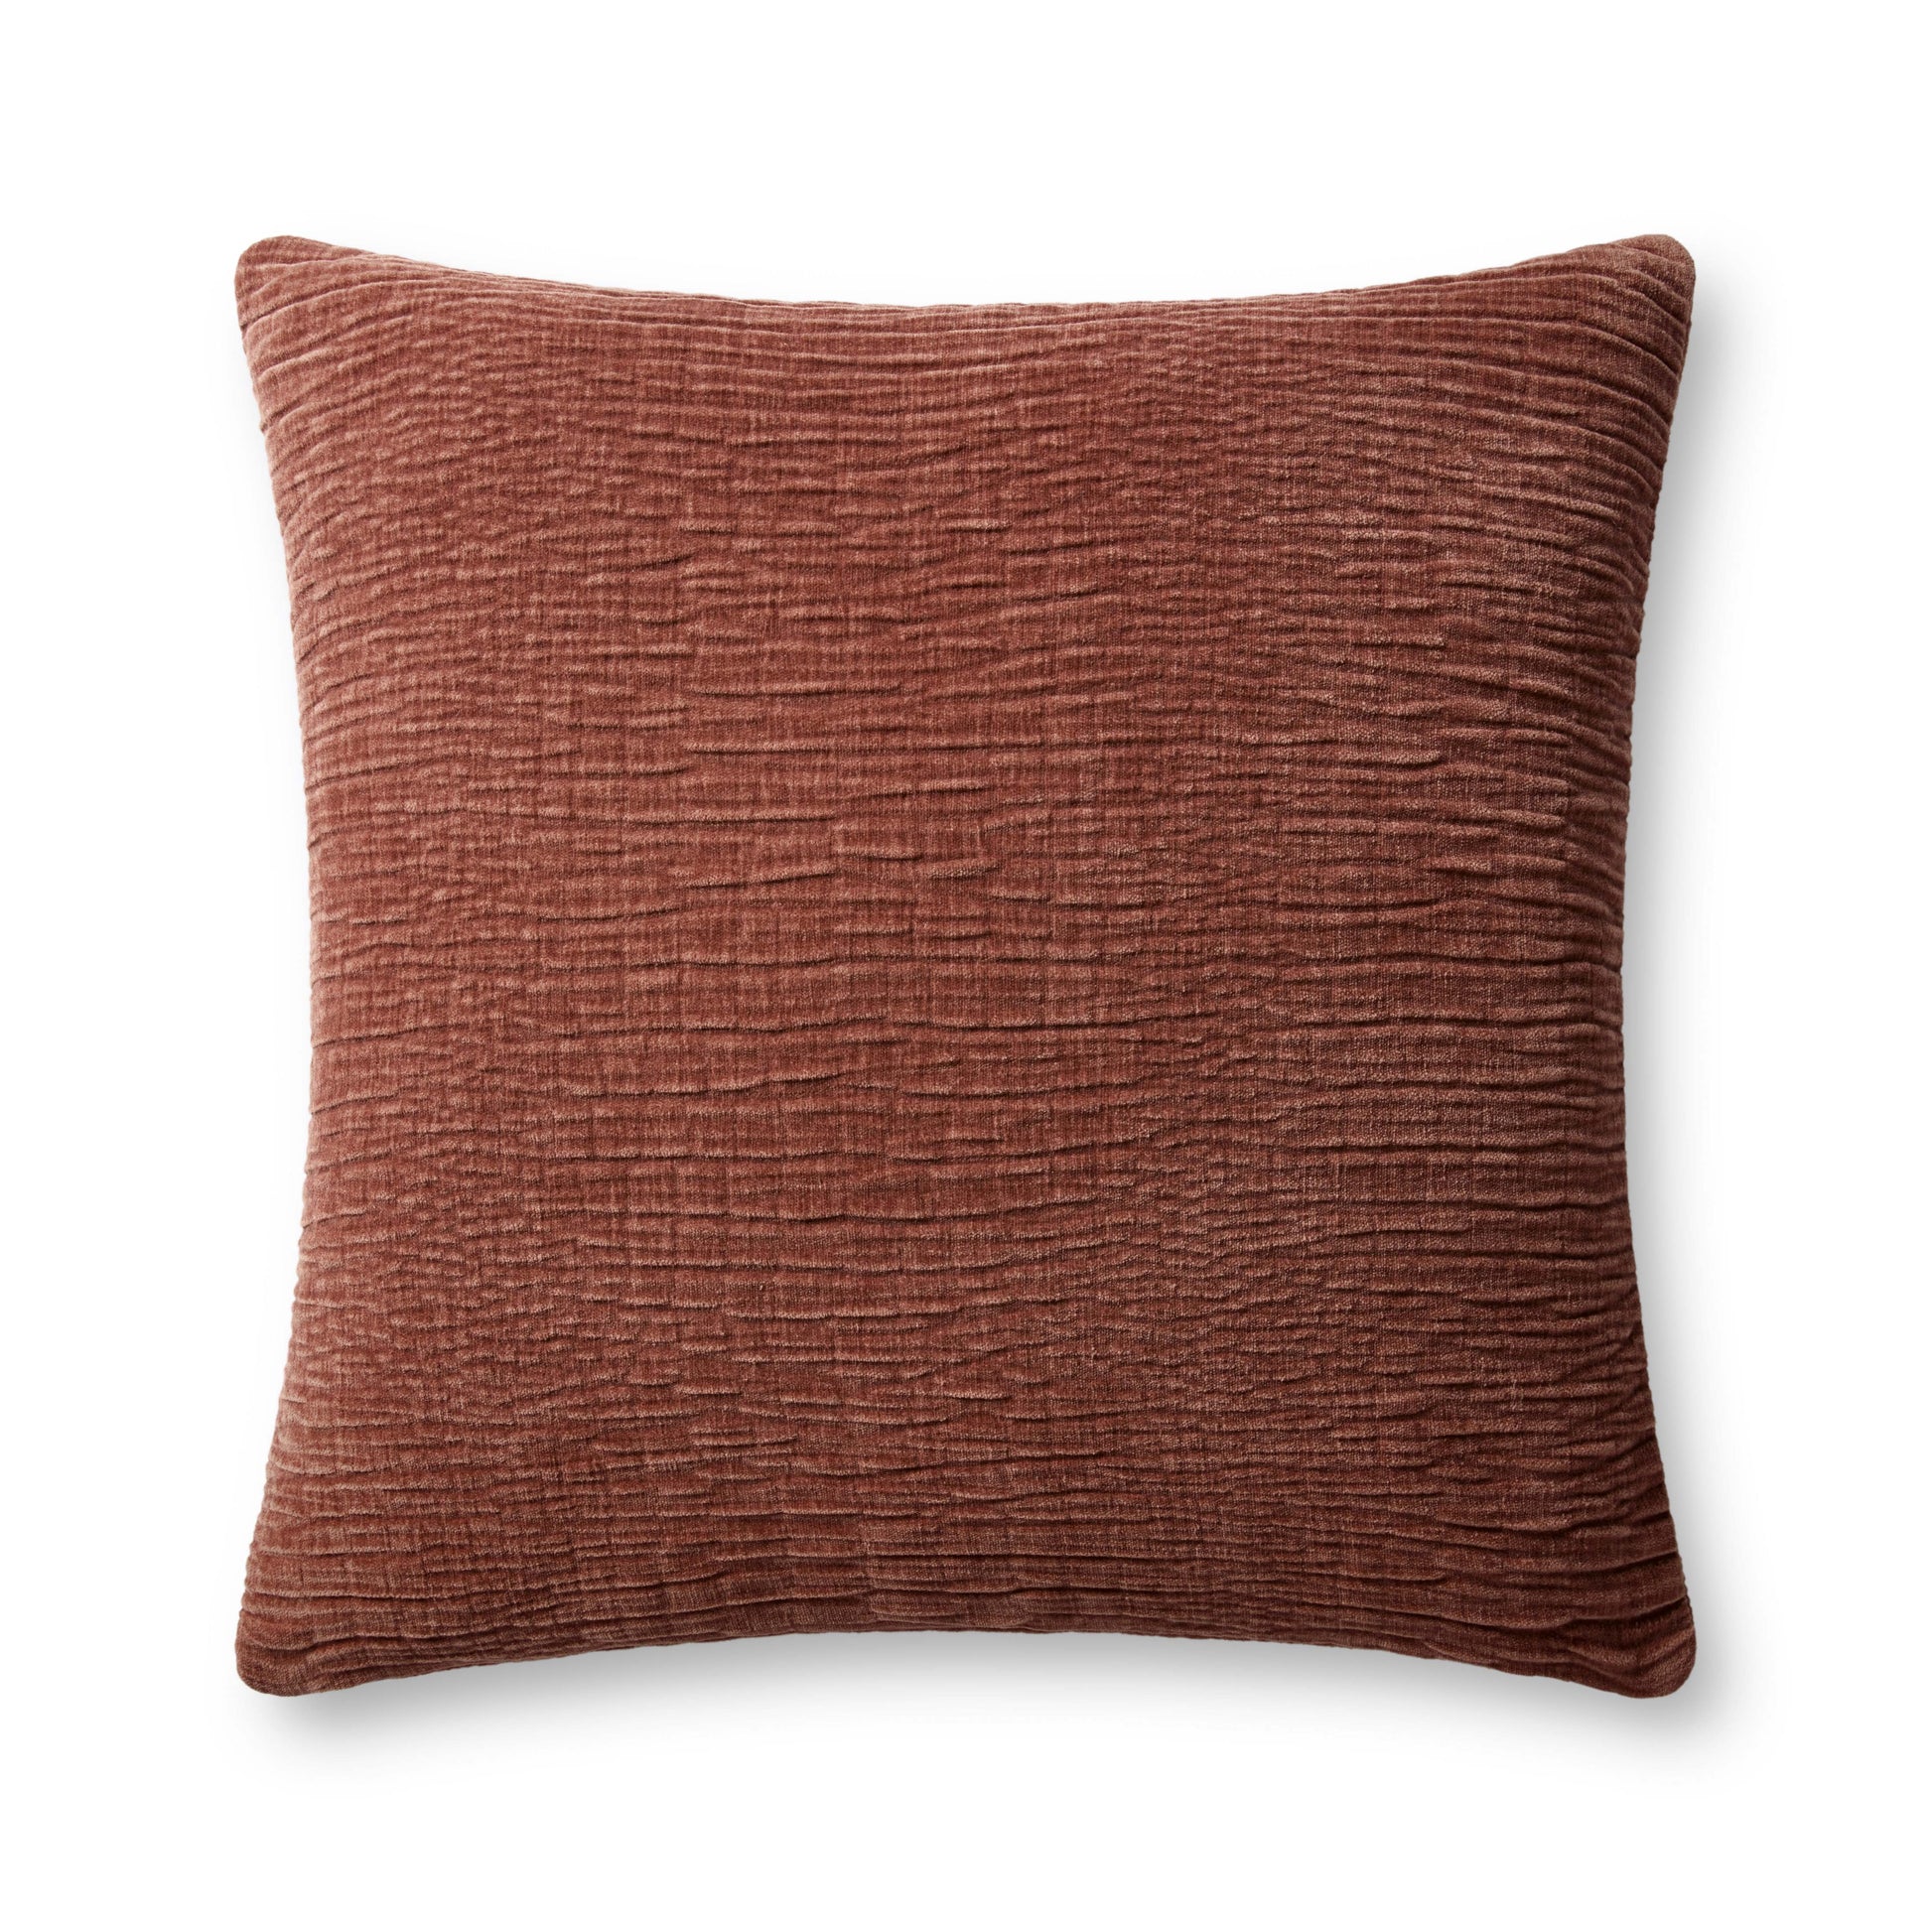 Photo of a pillow;  Copper 22'' x 22'' Cover w/Poly Pillow